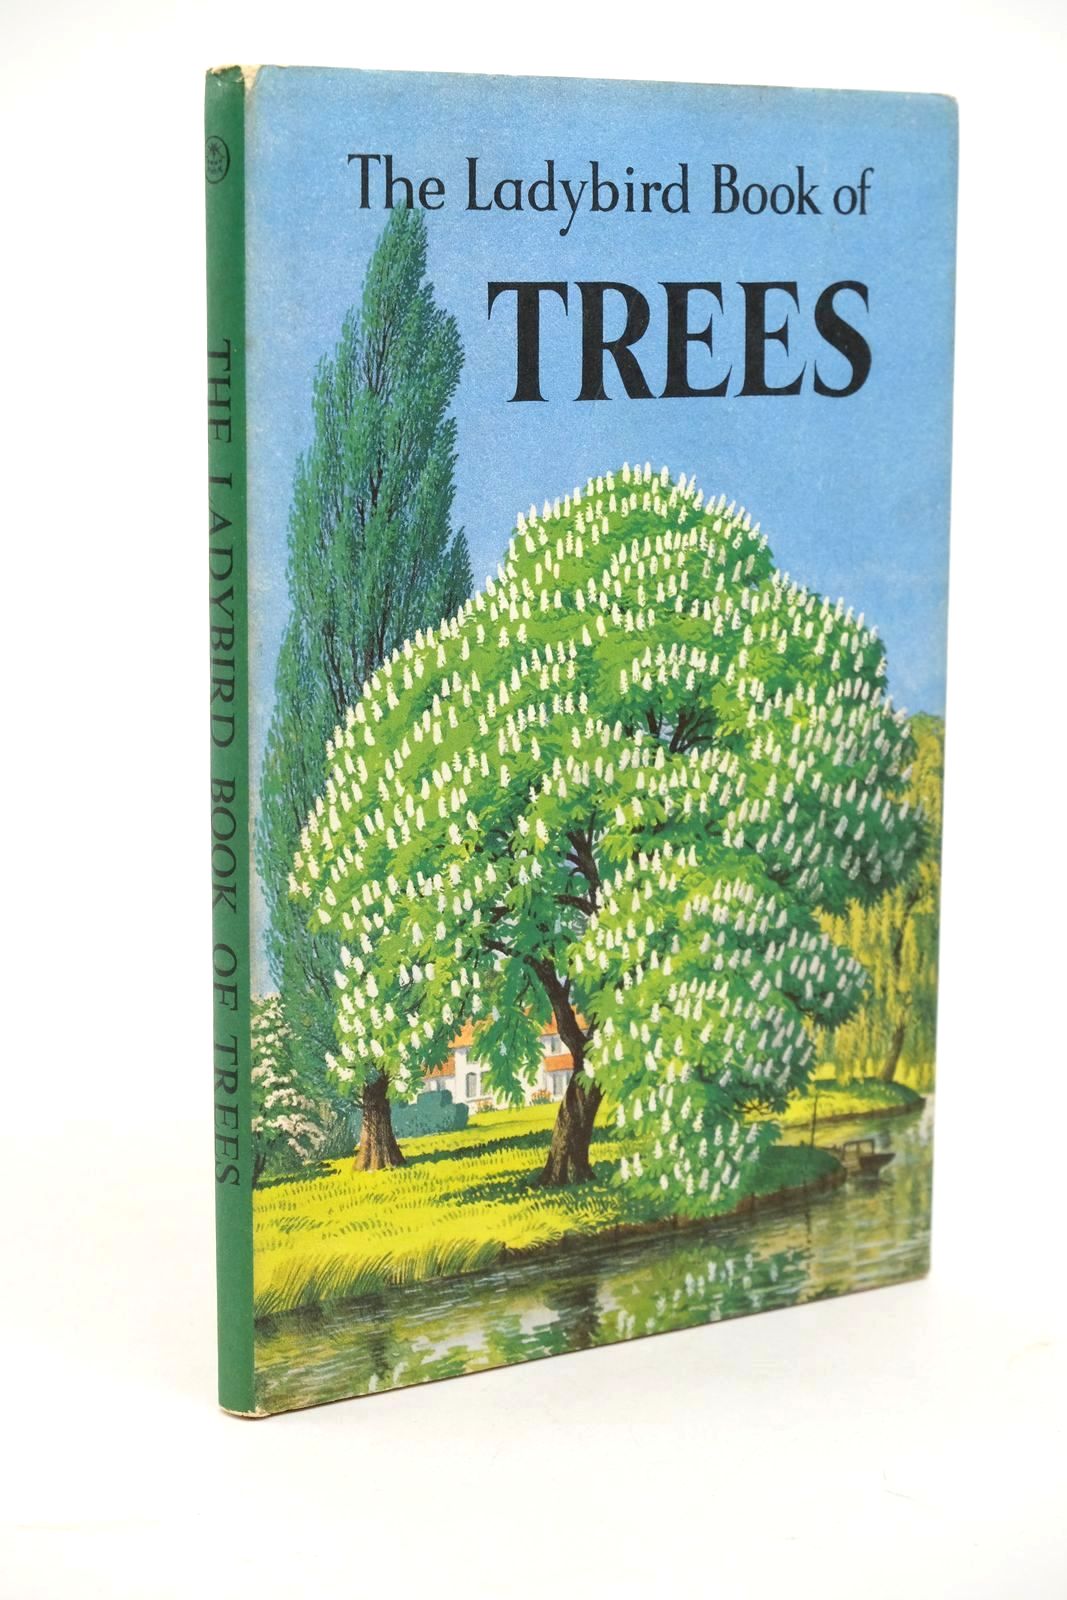 Photo of THE LADYBIRD BOOK OF TREES written by Vesey-Fitzgerald, Brian illustrated by Badmin, S.R. published by Wills & Hepworth Ltd. (STOCK CODE: 1323148)  for sale by Stella & Rose's Books